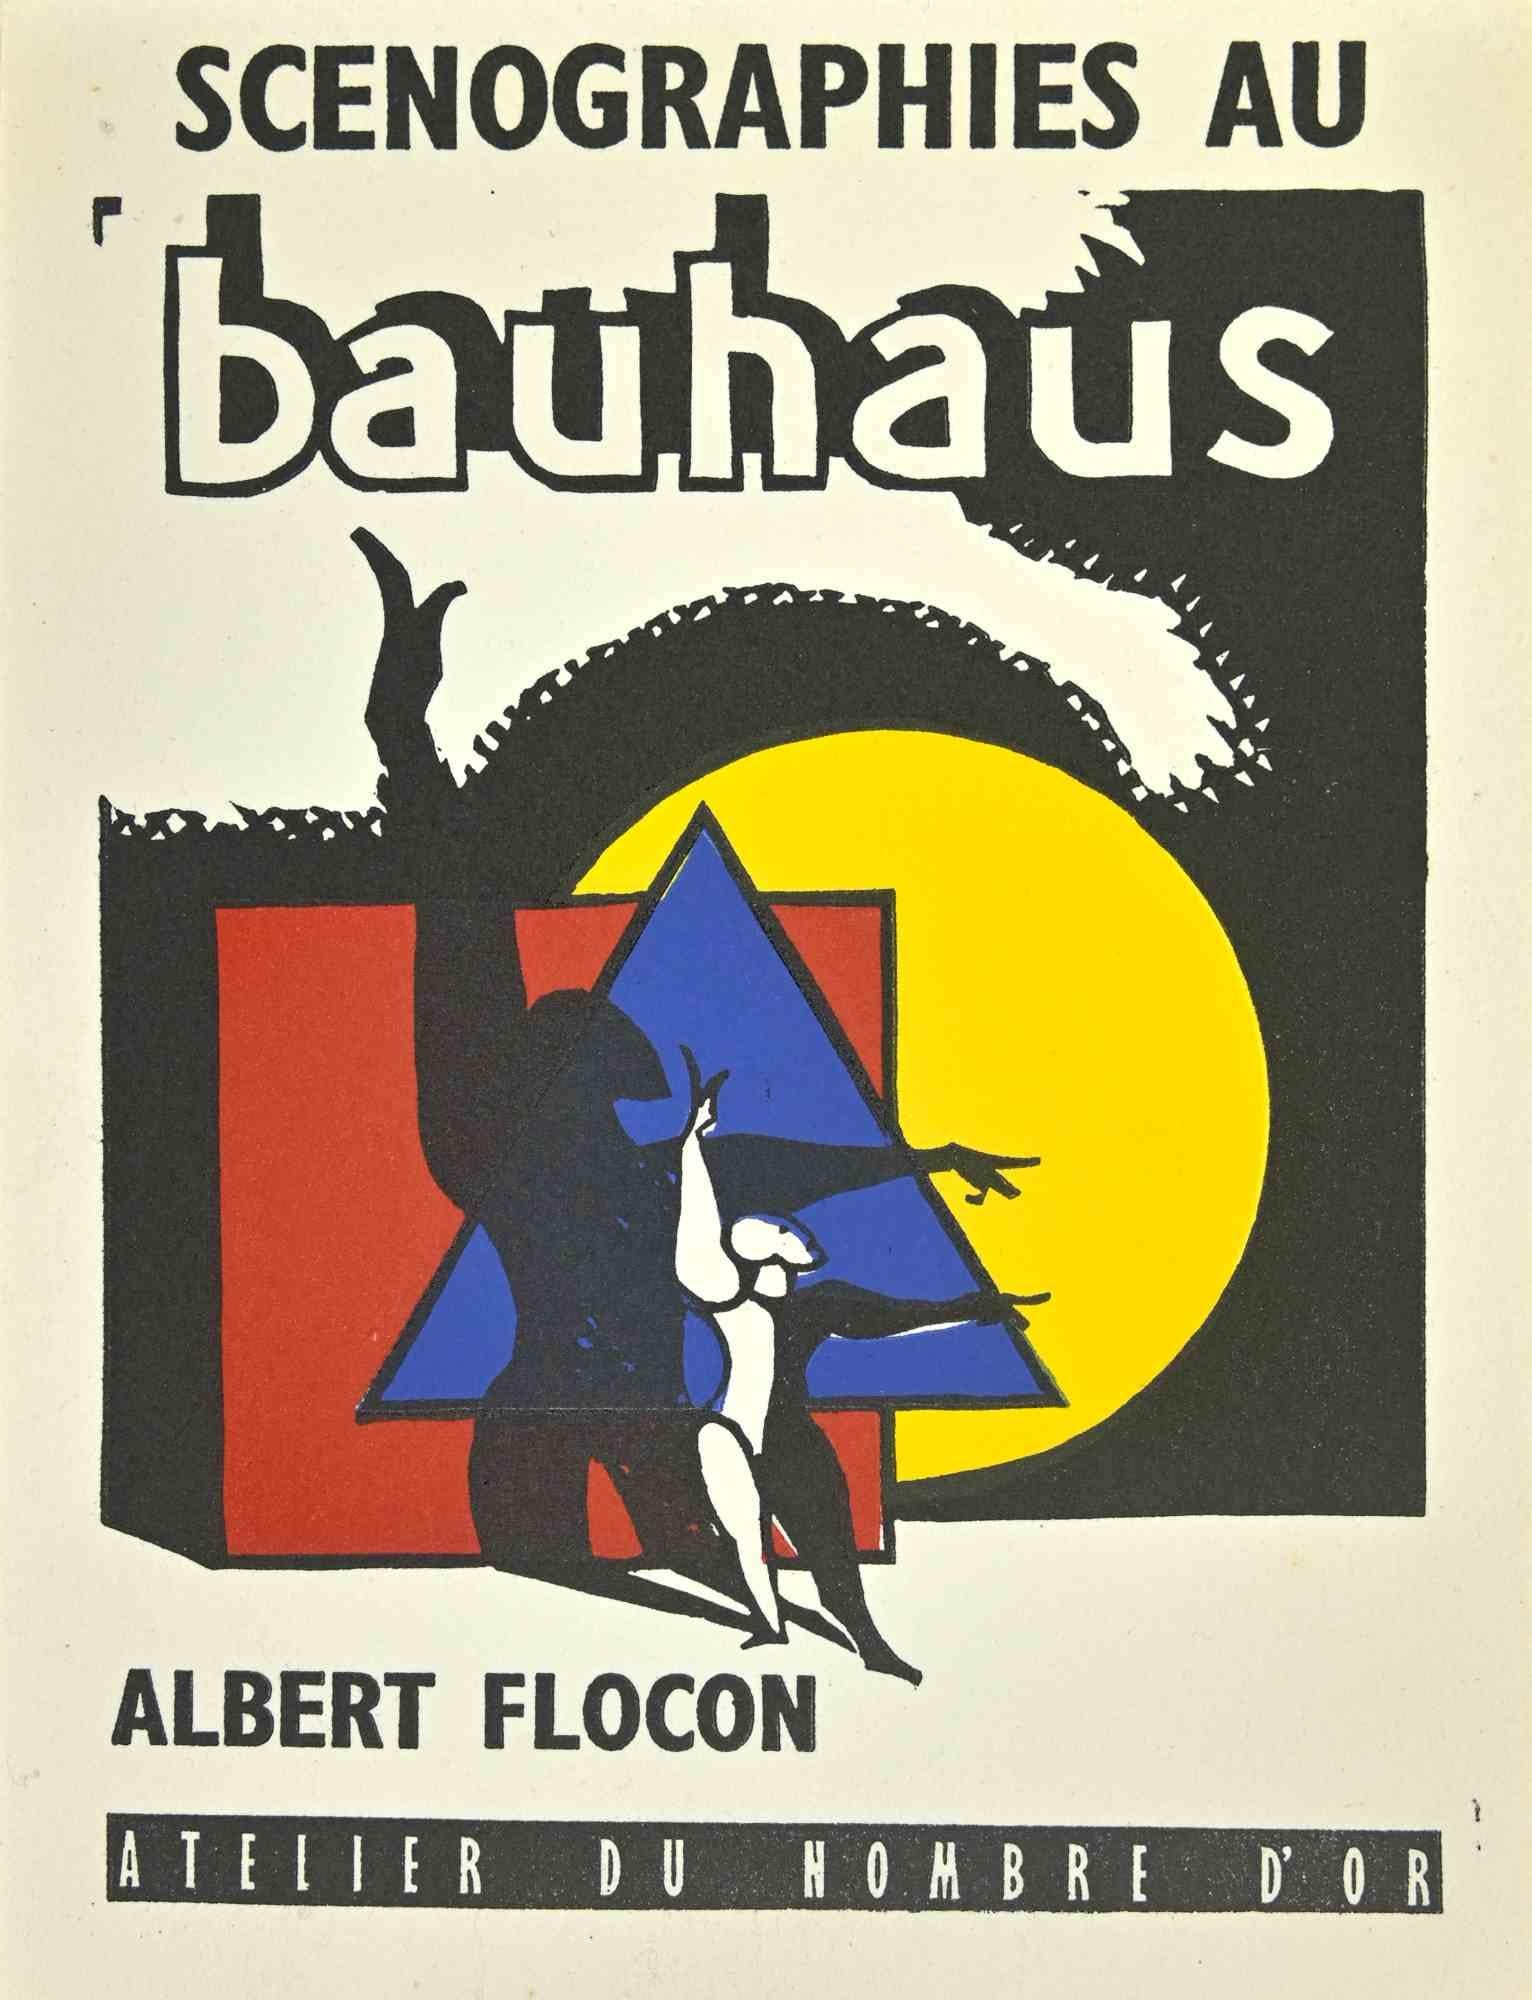 Cover of "Scenographies du Bauhaus" is a  woodcut print on paper realized by Albert Flocon in the 1940s.

Good conditions.

Belongs to the series " from the "Scénographies du Bahuhaus".